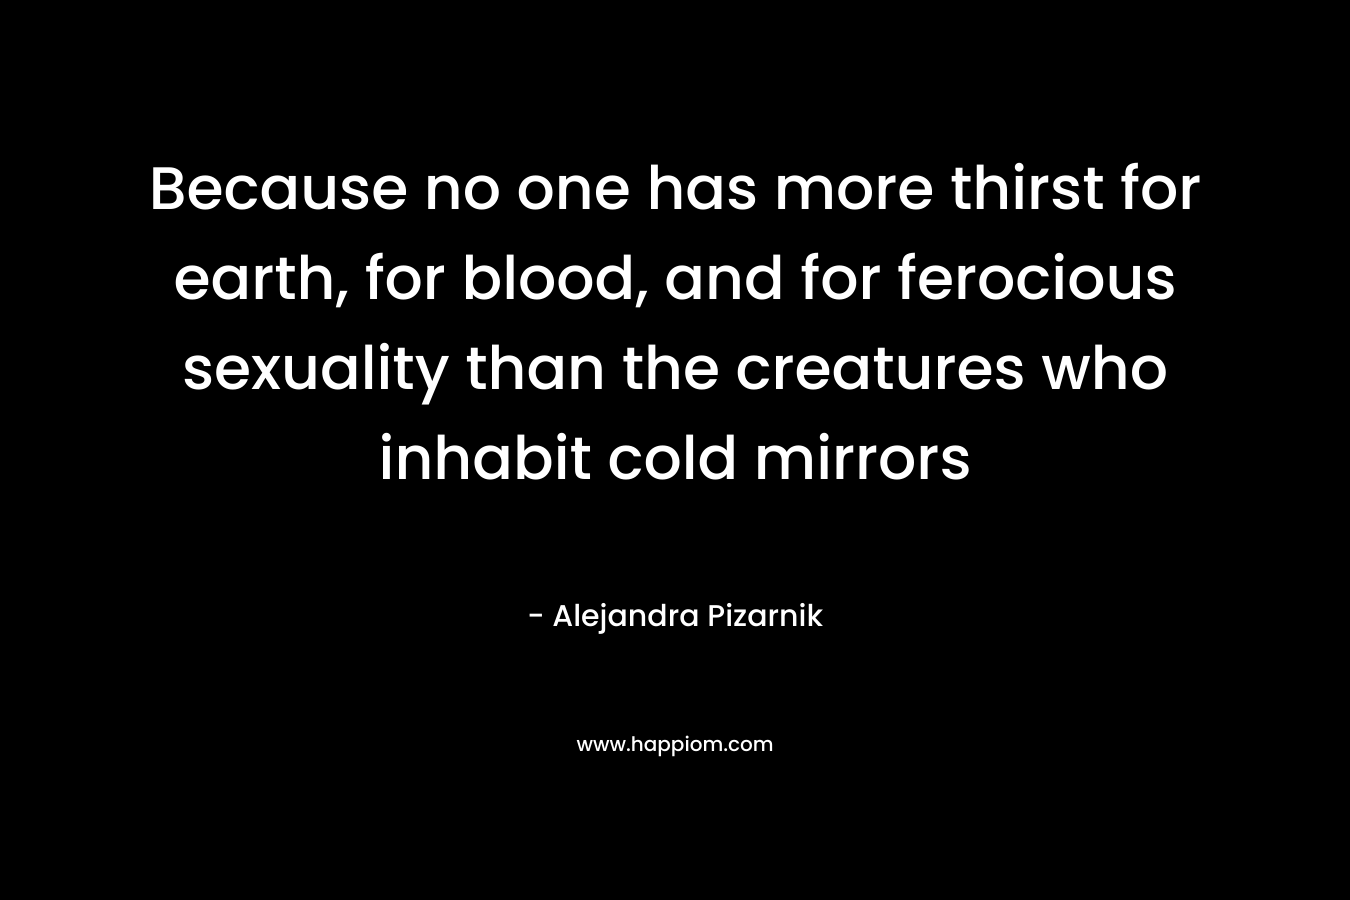 Because no one has more thirst for earth, for blood, and for ferocious sexuality than the creatures who inhabit cold mirrors